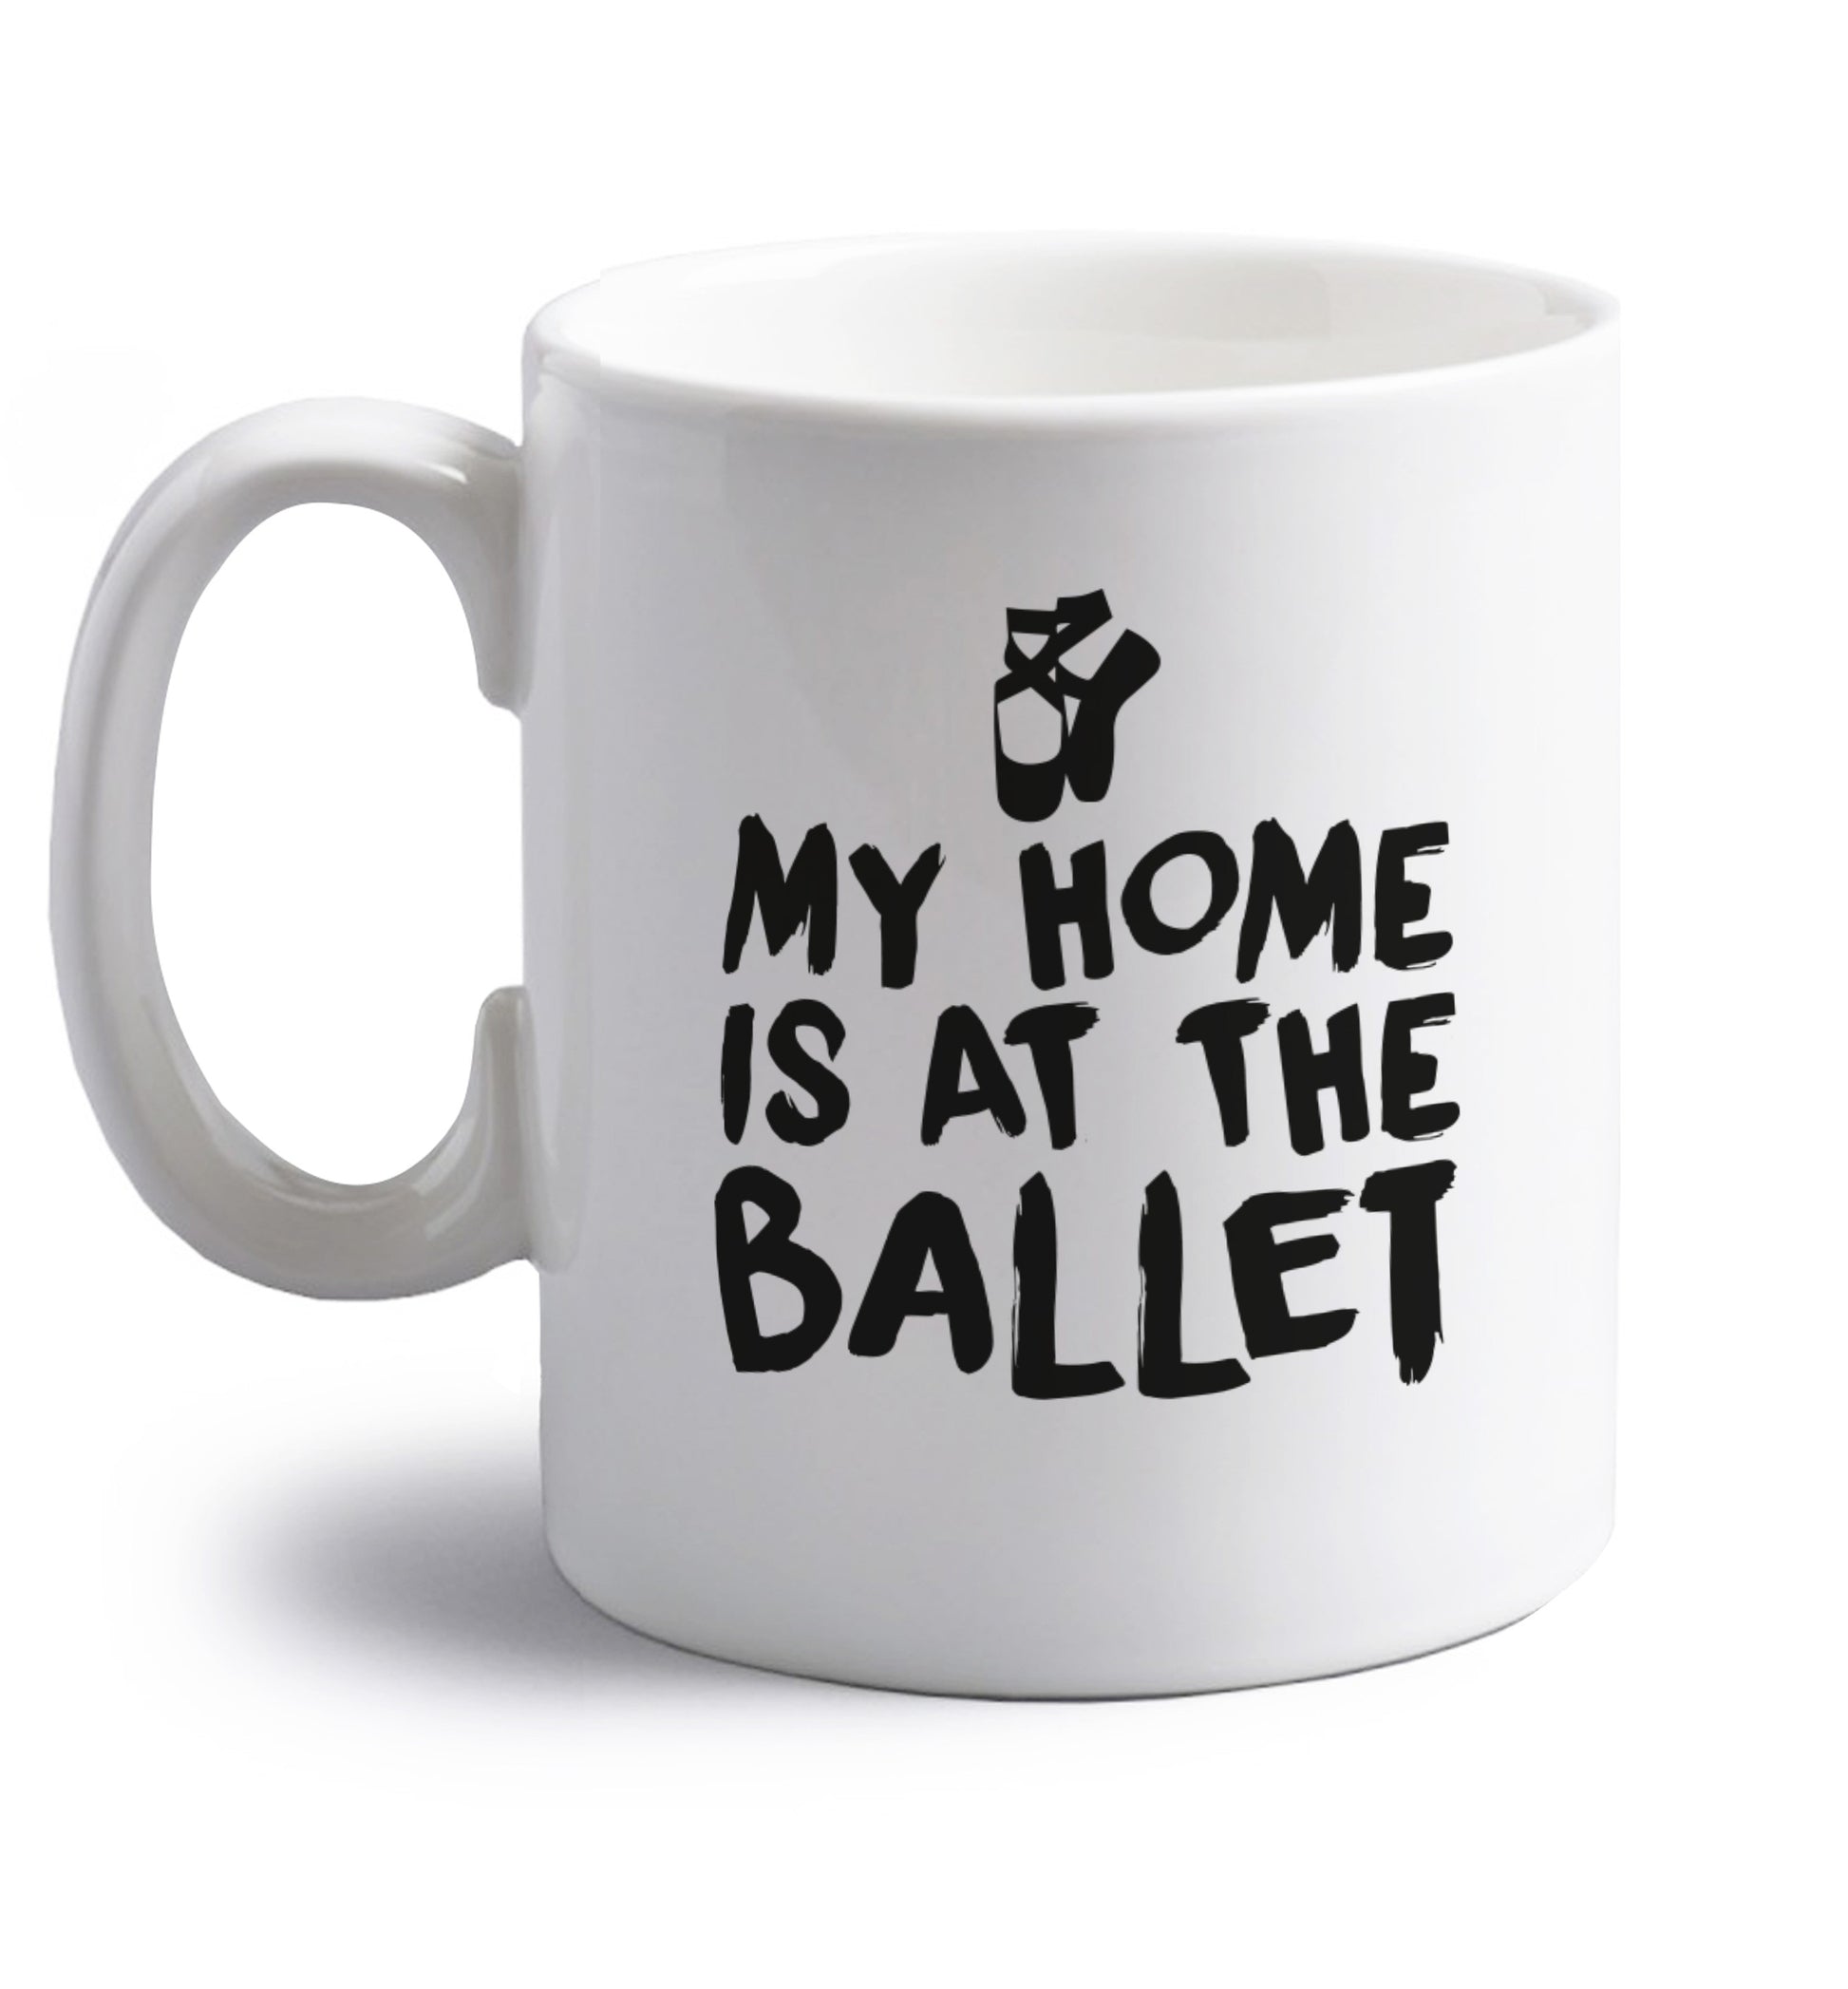 My home is at the dance studio right handed white ceramic mug 